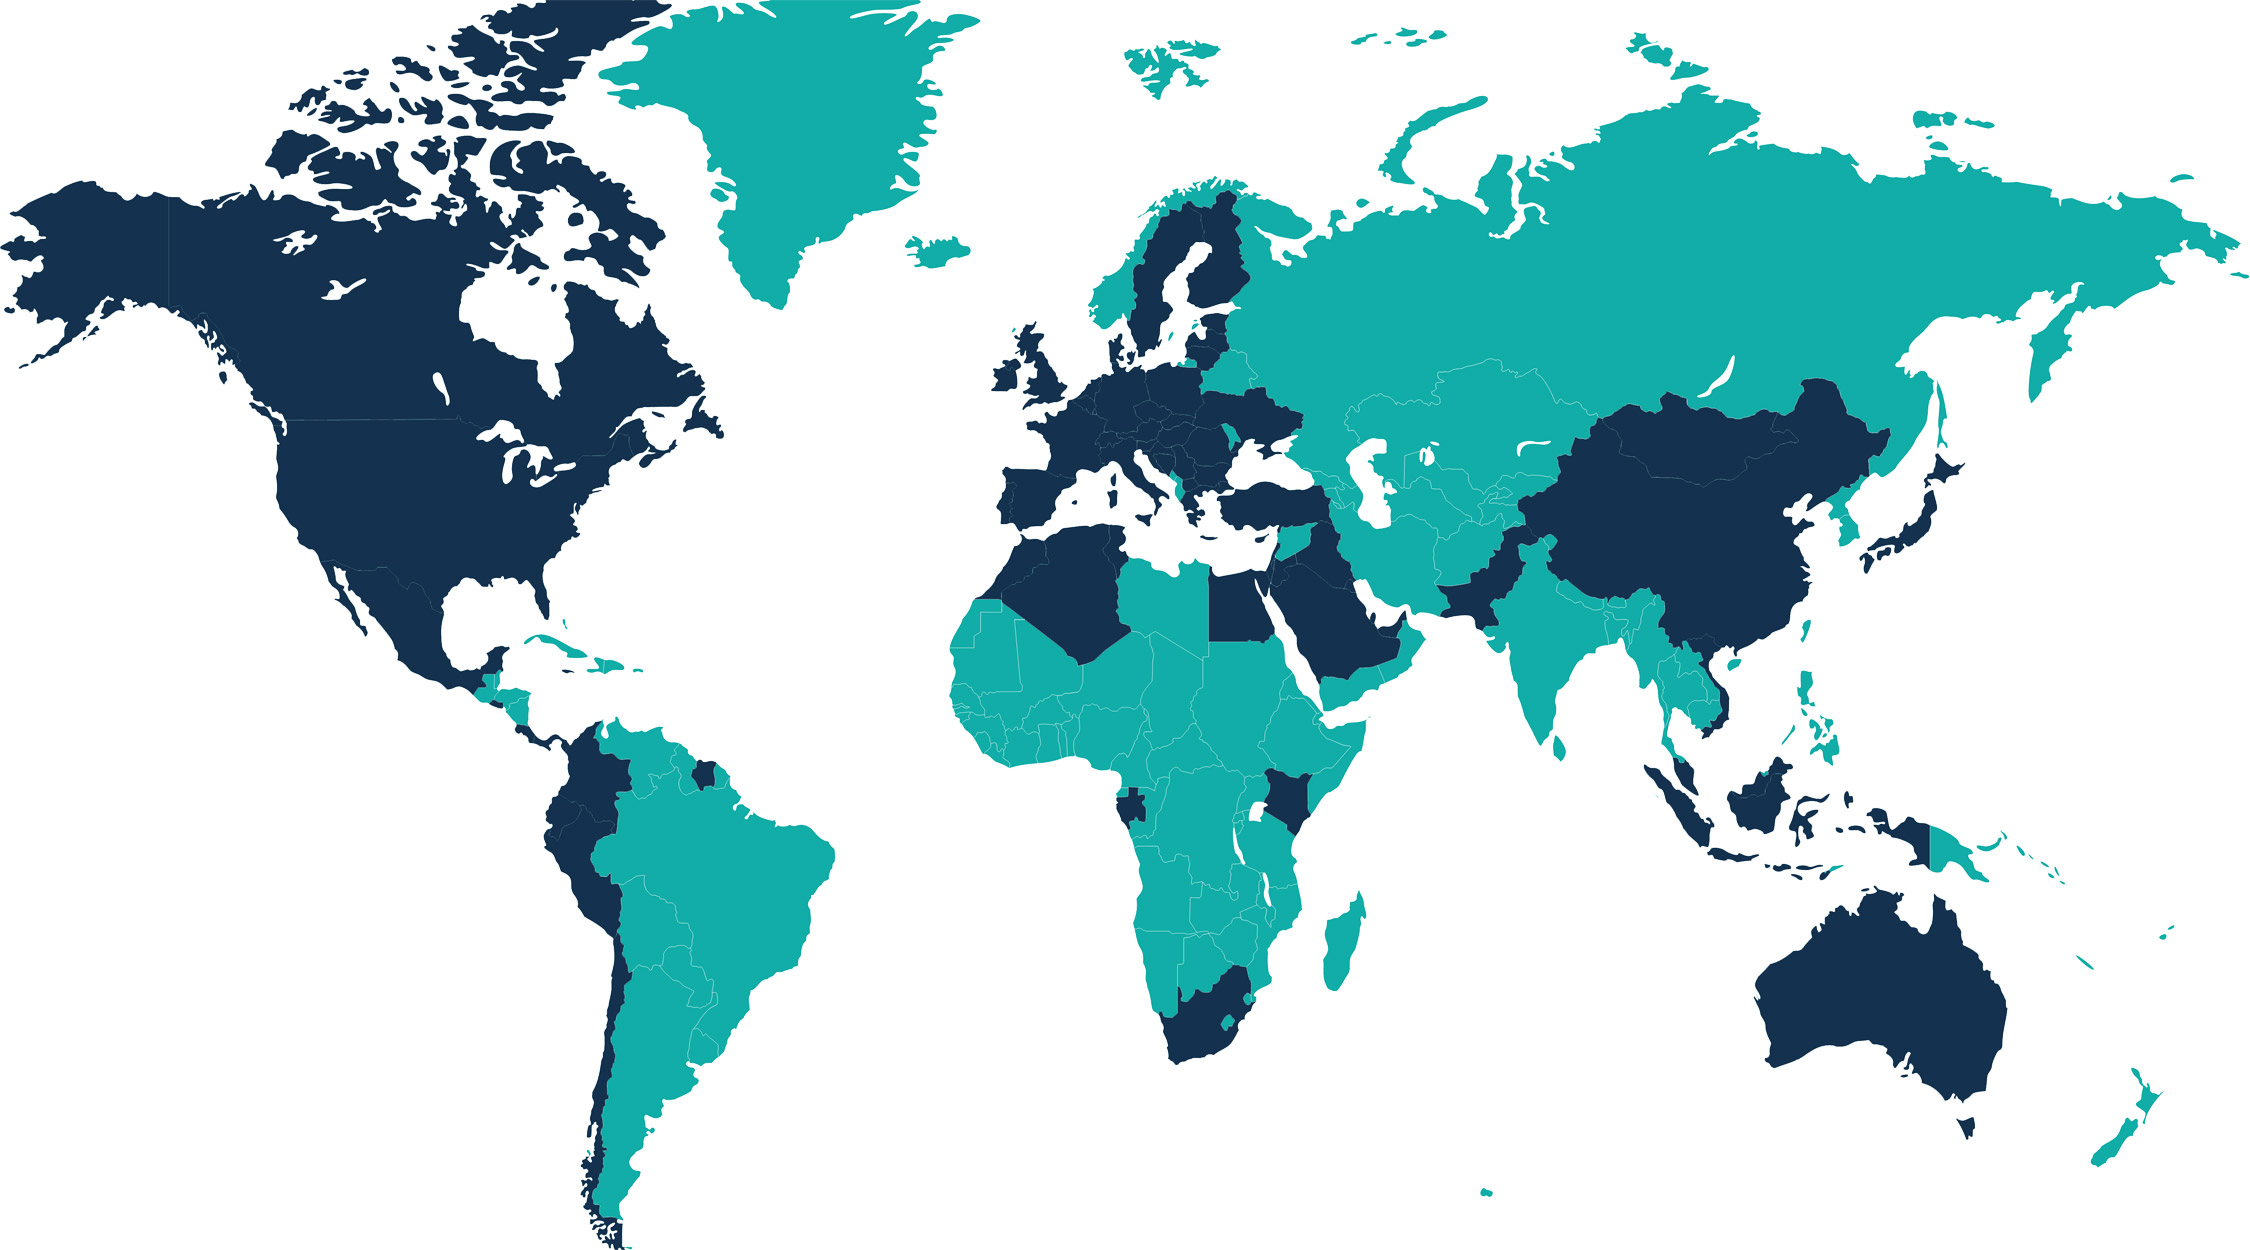 Countries where FH exports: updated May 2020